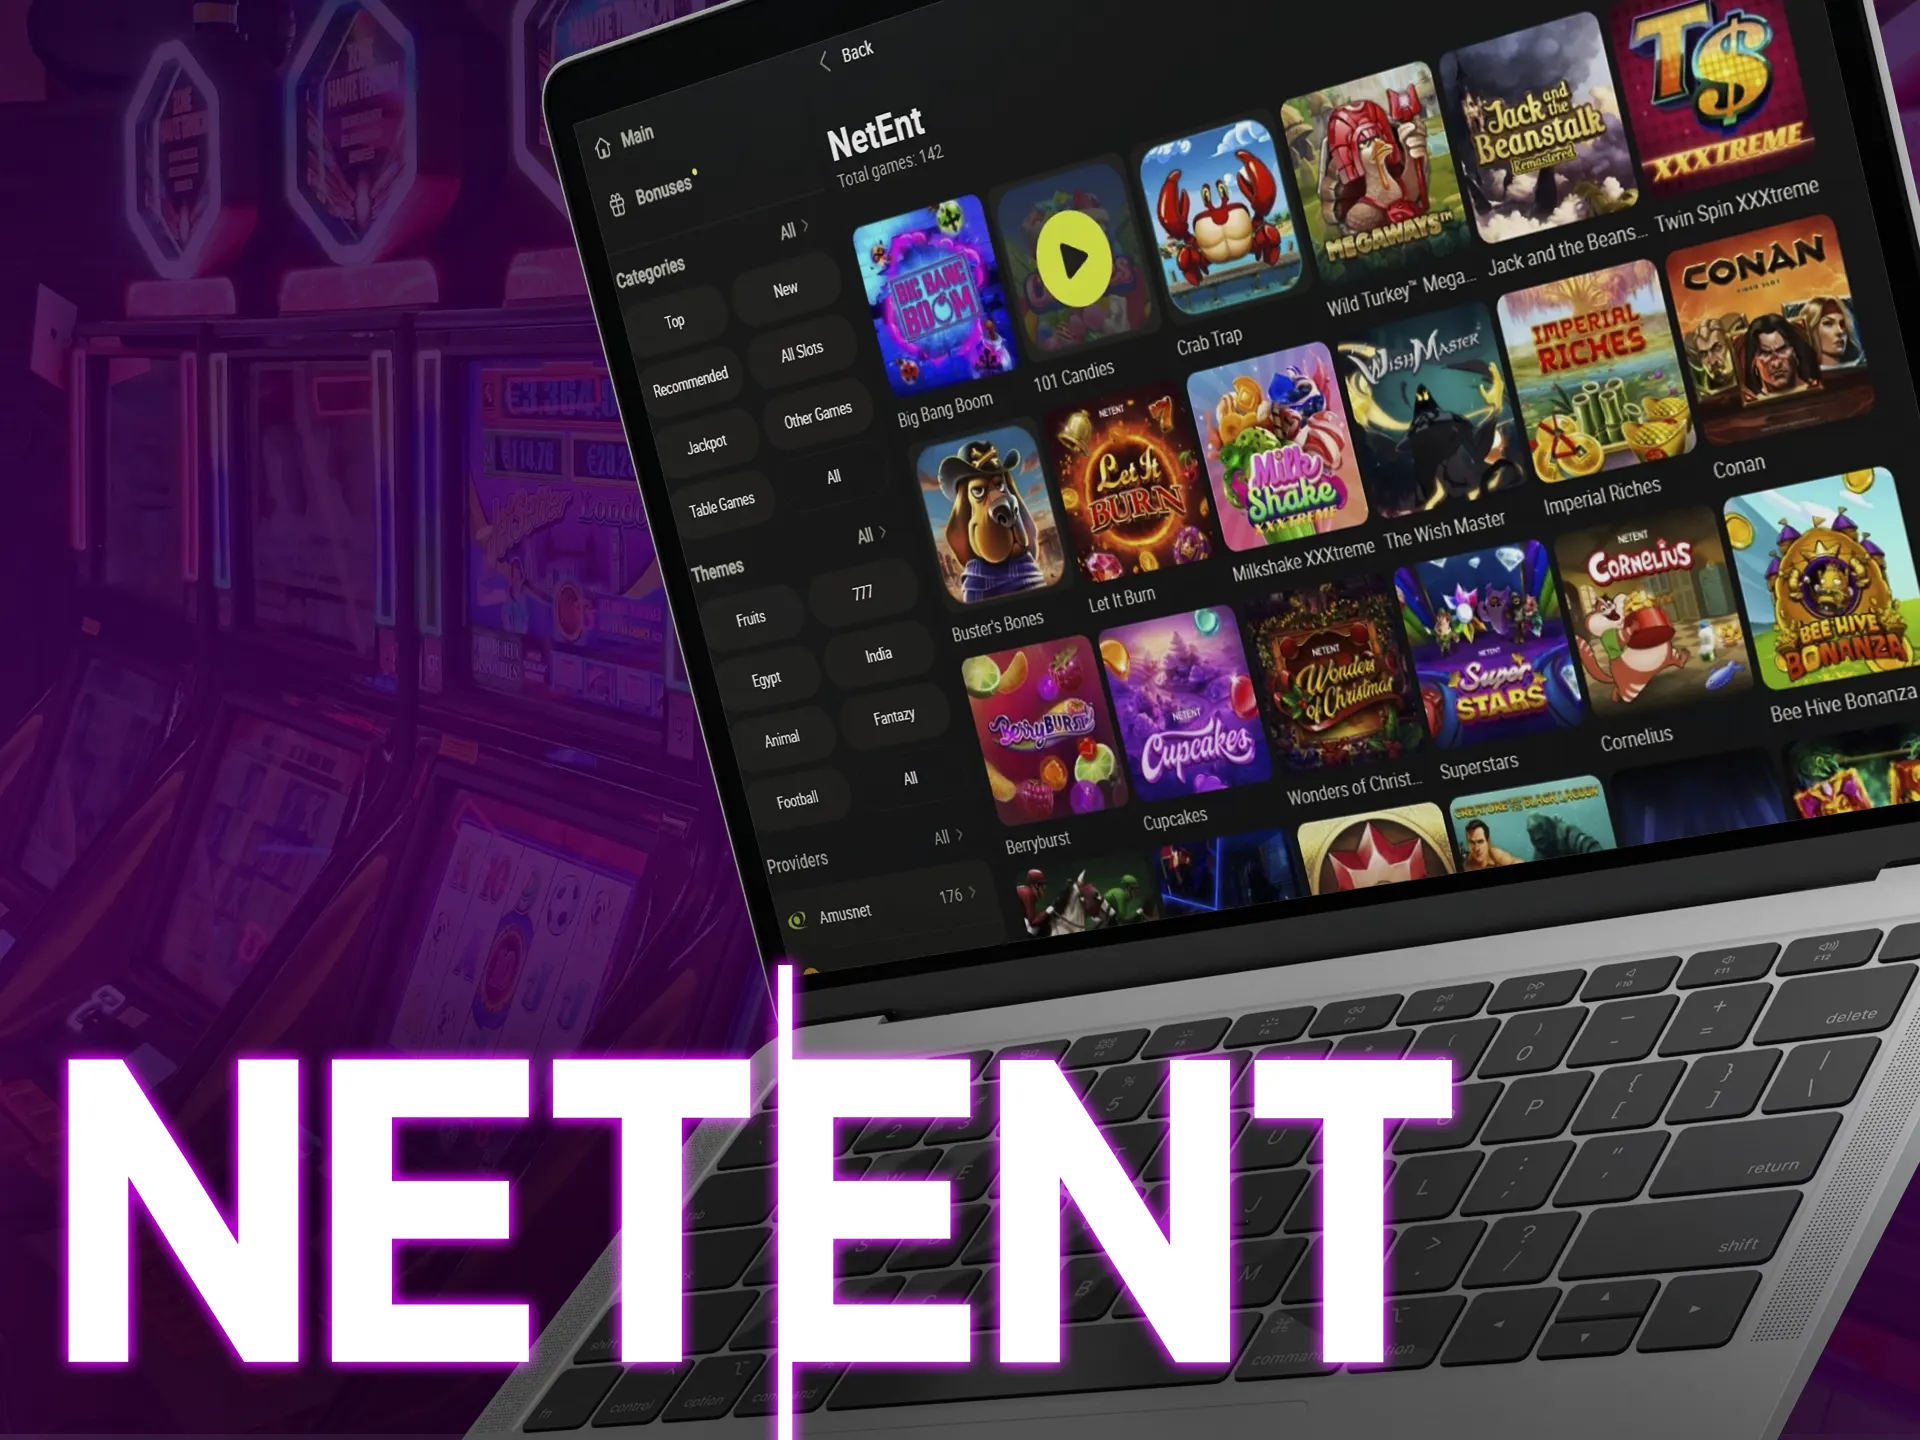 NetEnt, a leading game provider, has more than 200 slot machines.